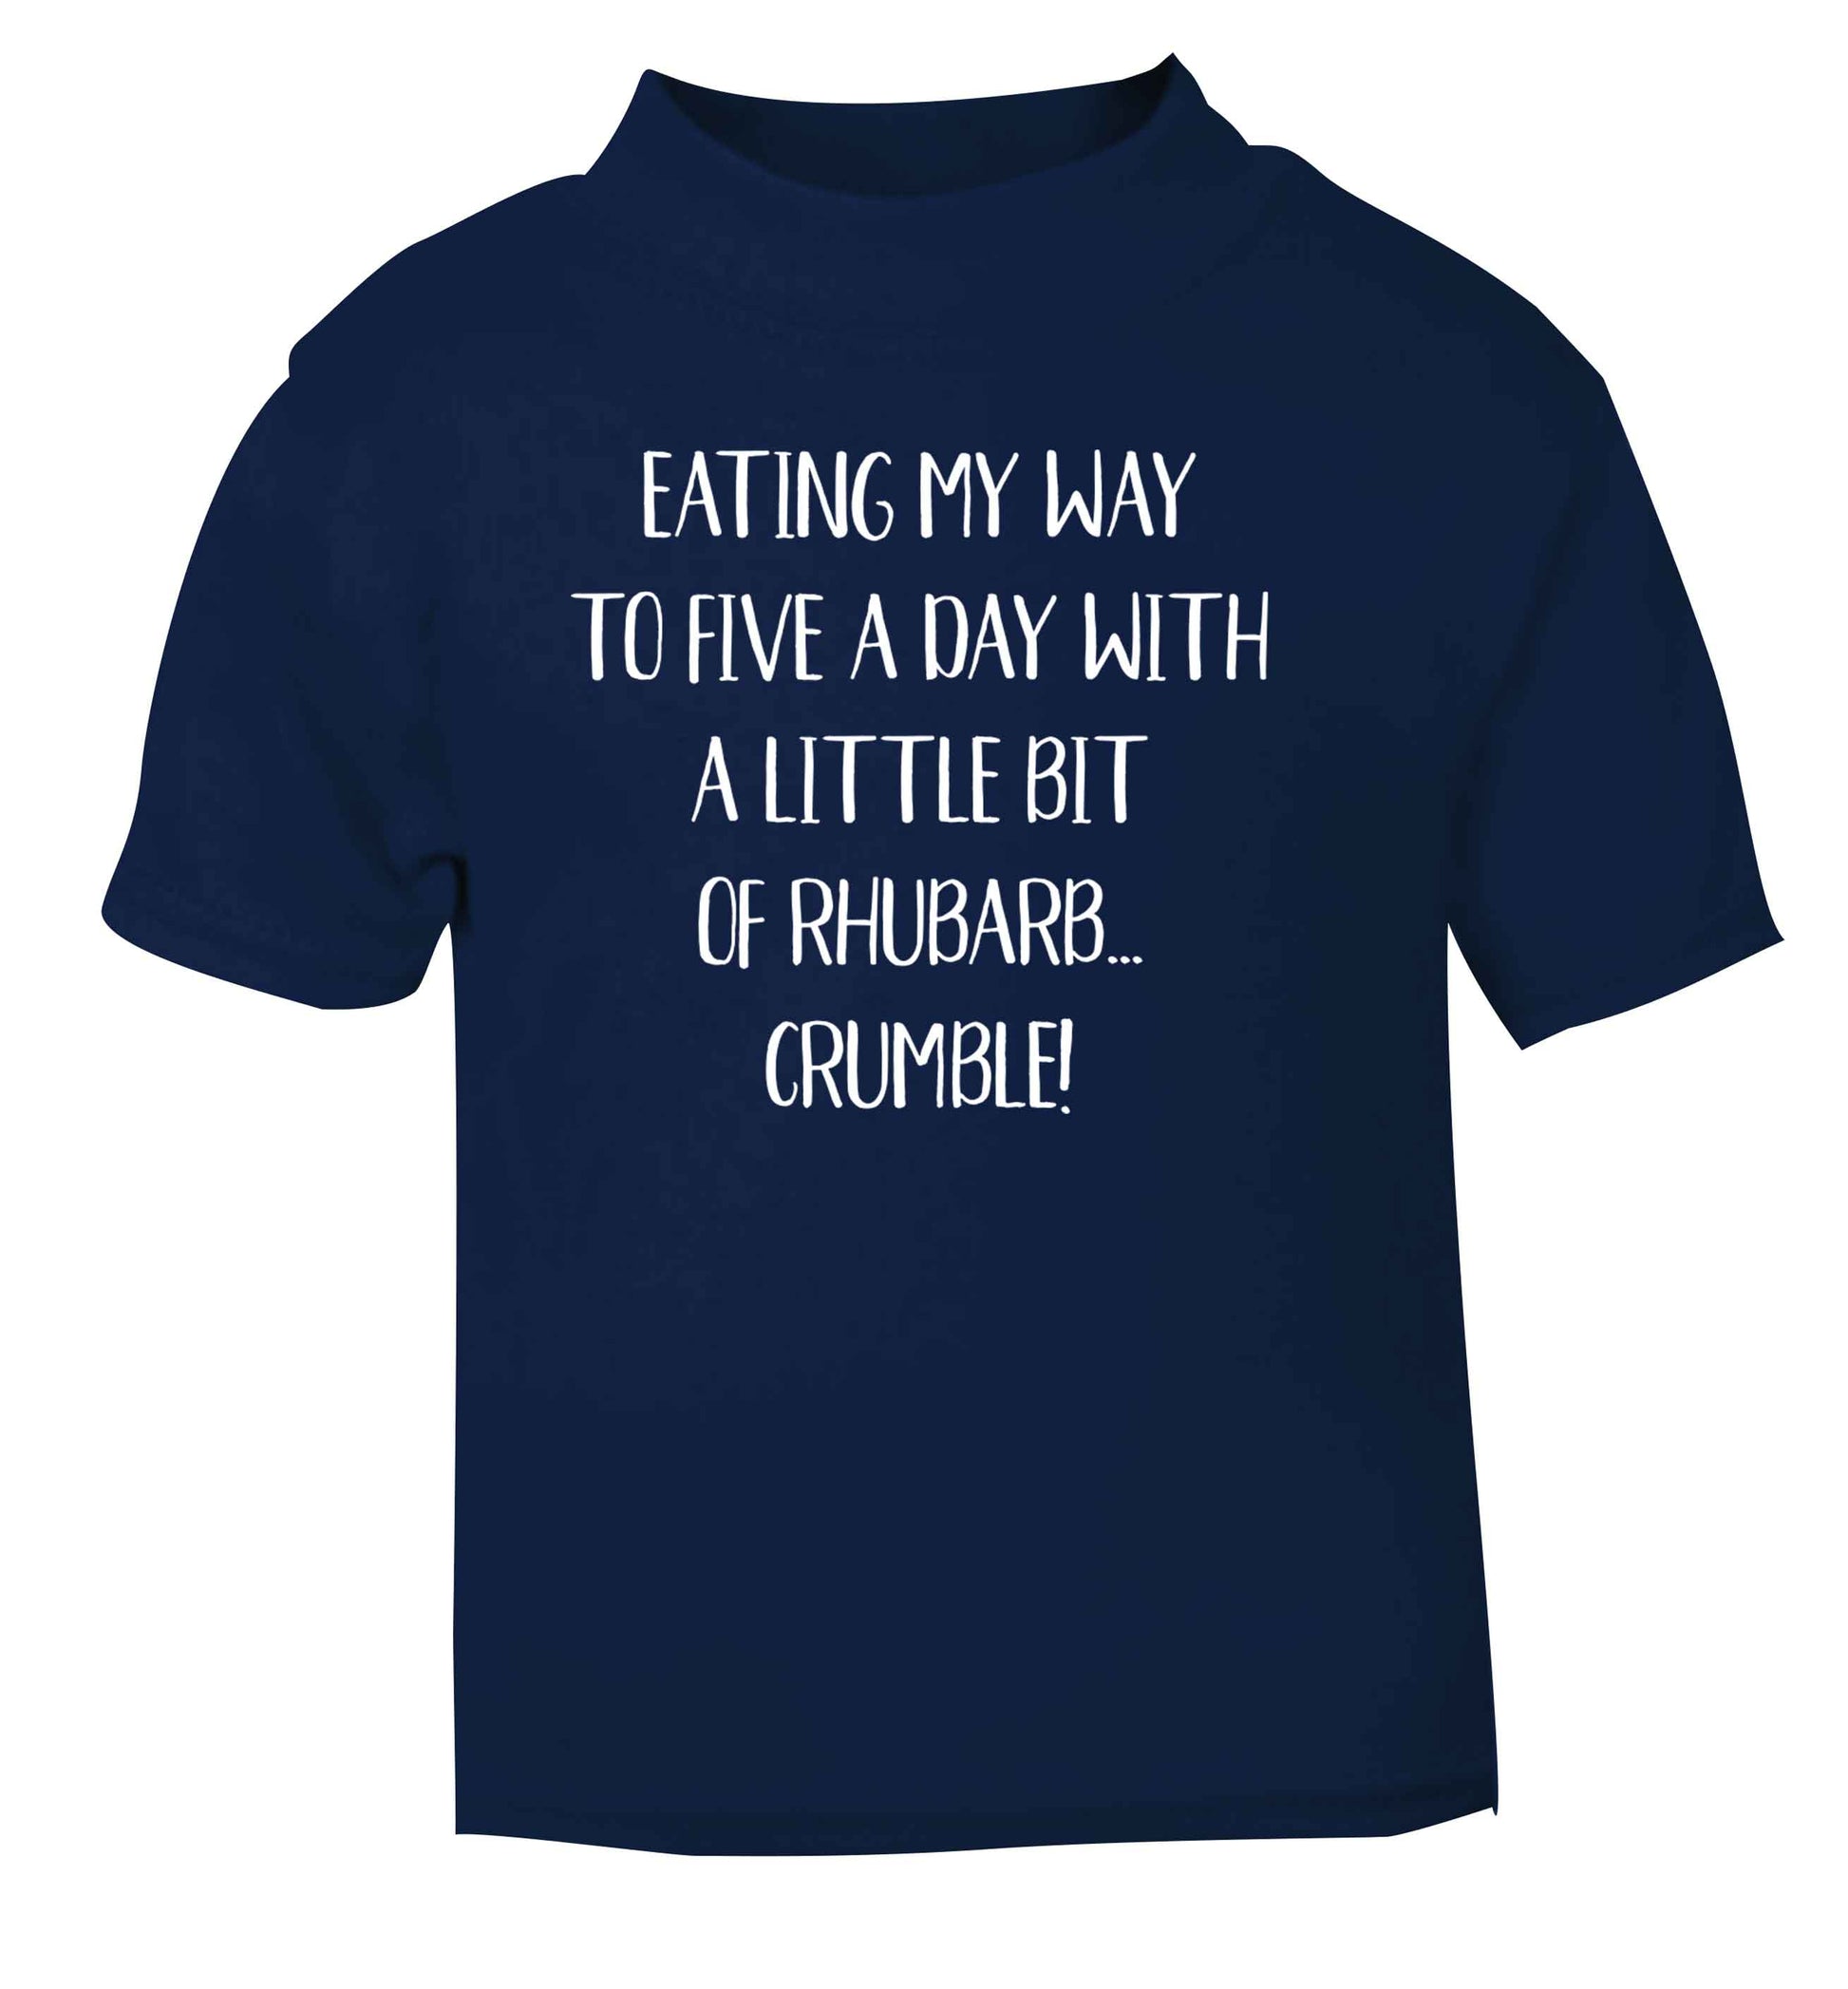 Eating my way to five a day with a little bit of rhubarb crumble navy Baby Toddler Tshirt 2 Years